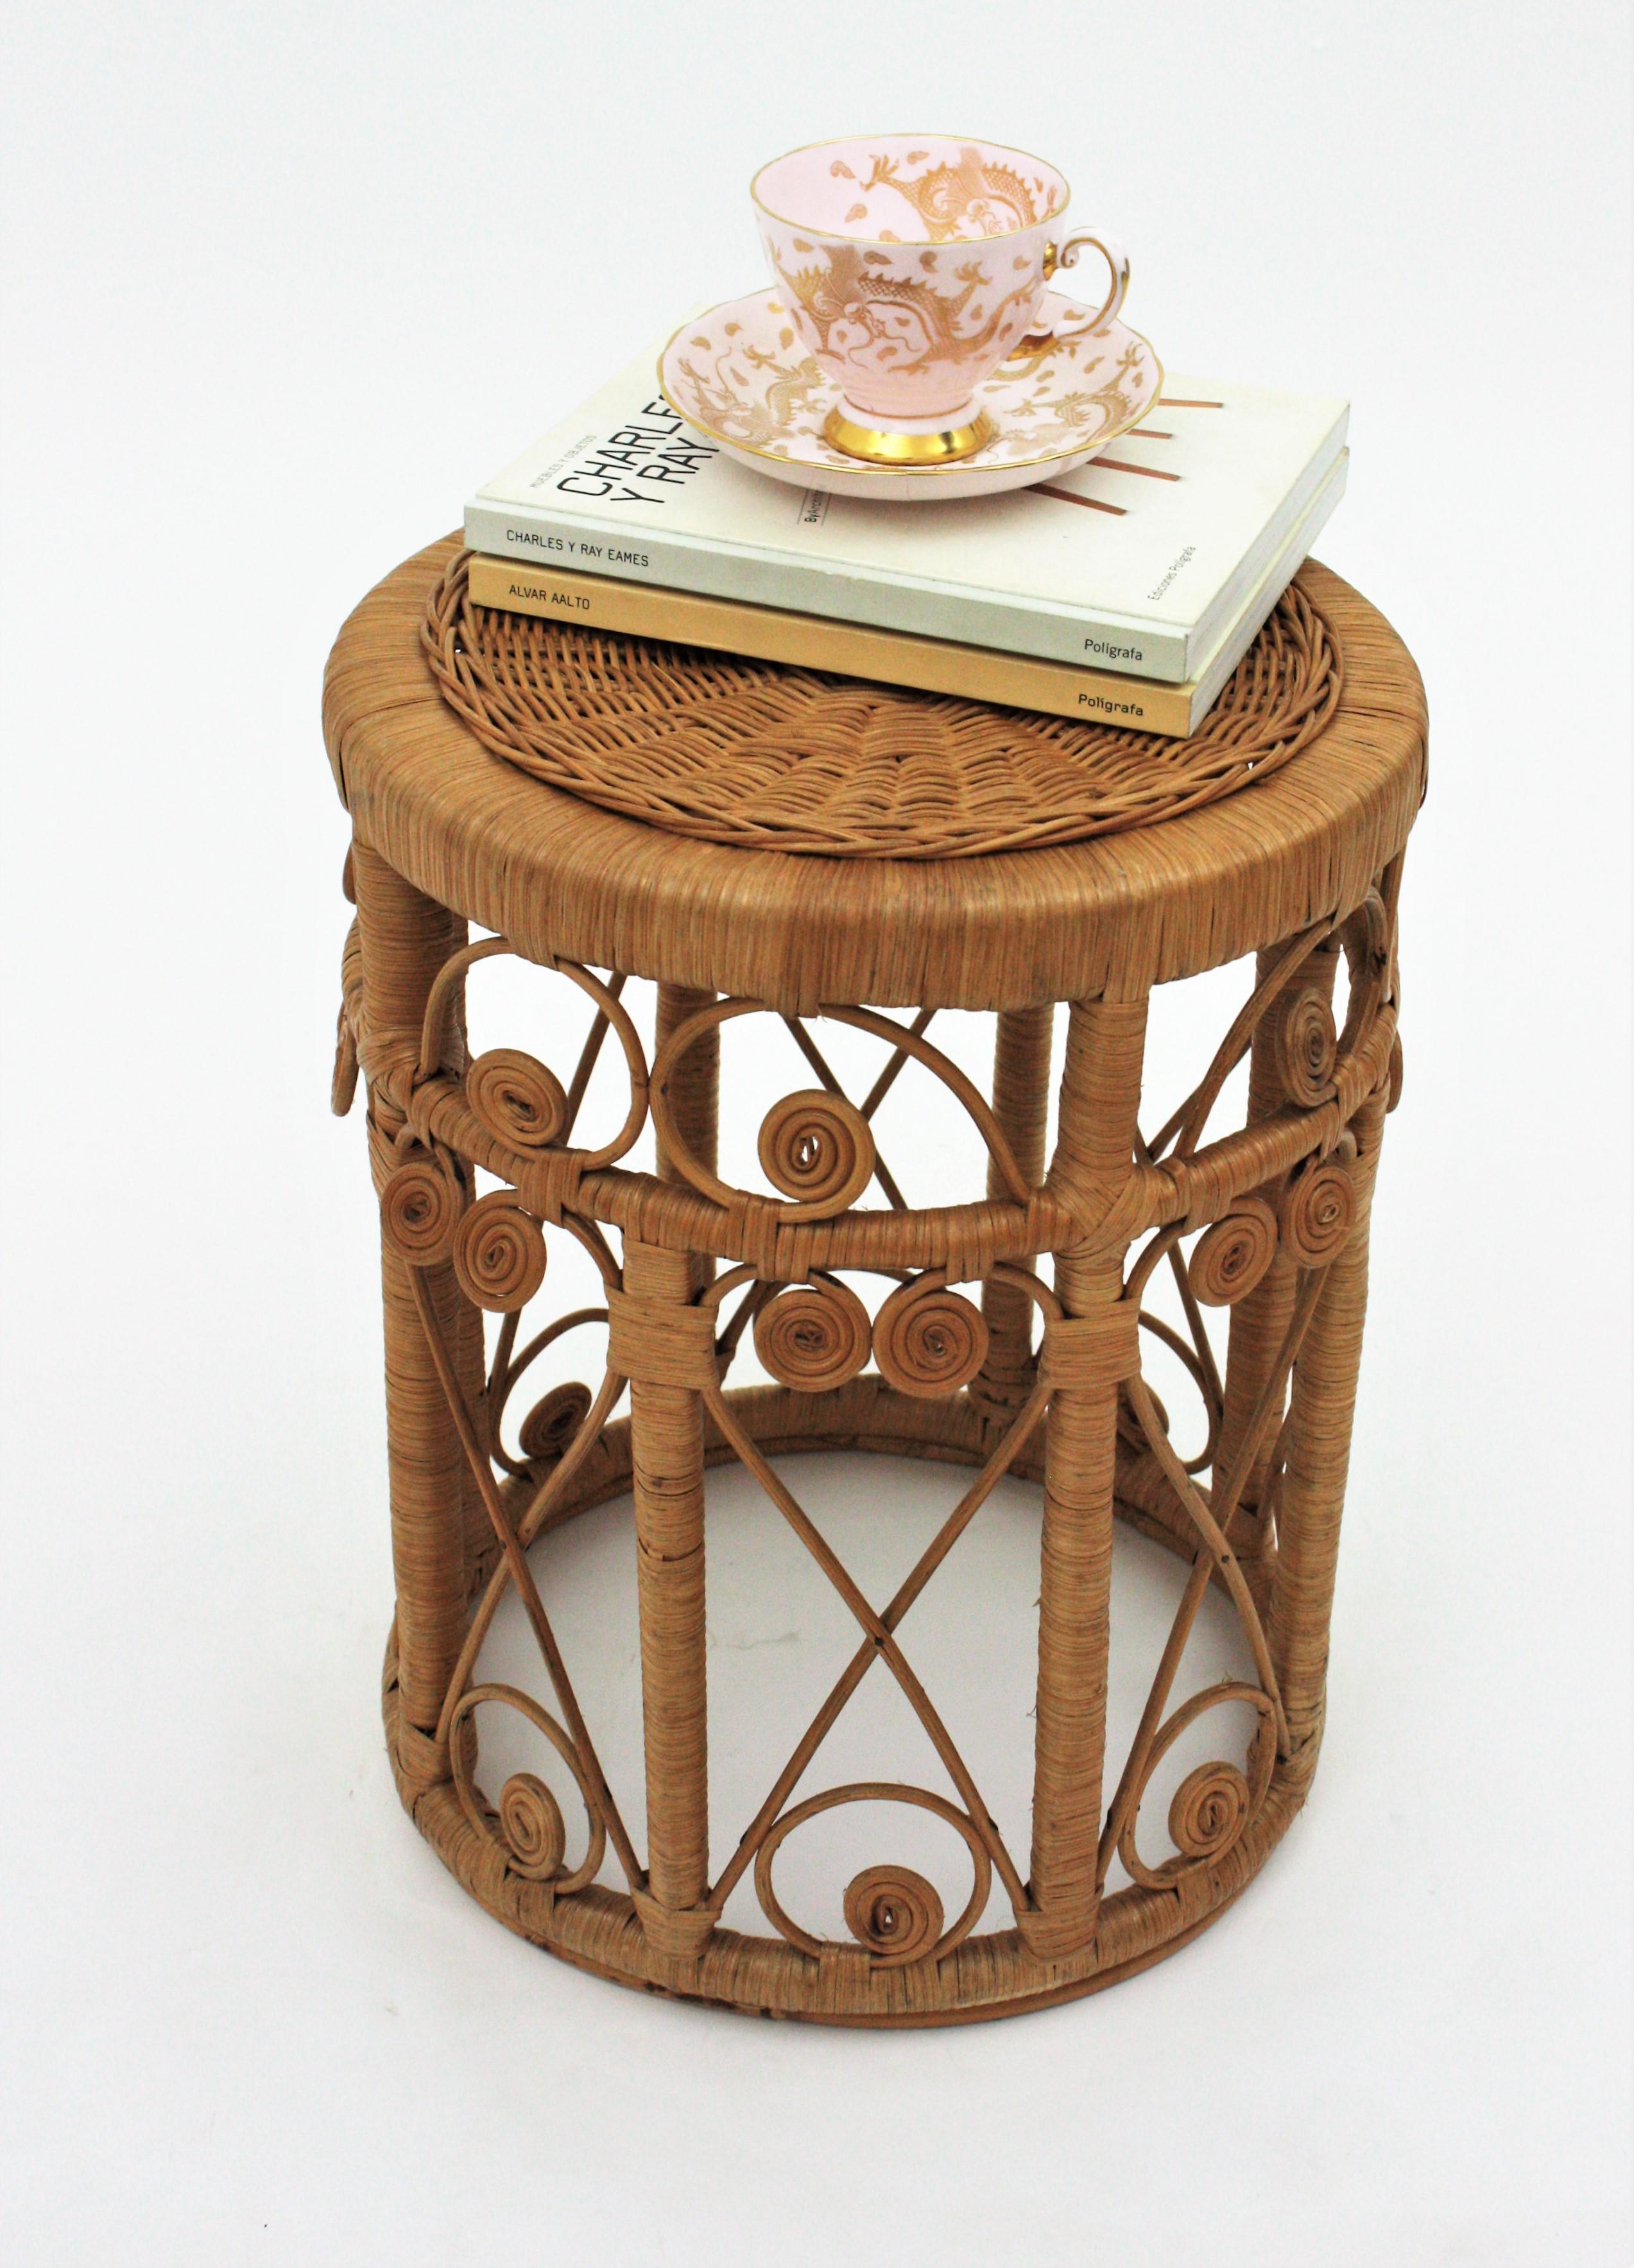 Lovely handcrafted wicker cane stool, side table or stand with beautiful artistic filigree work. Spain, 1960s
This round stool has all the taste of the Mediterranean Midcentury and Bohemian style and reminiscences in design of the peacock